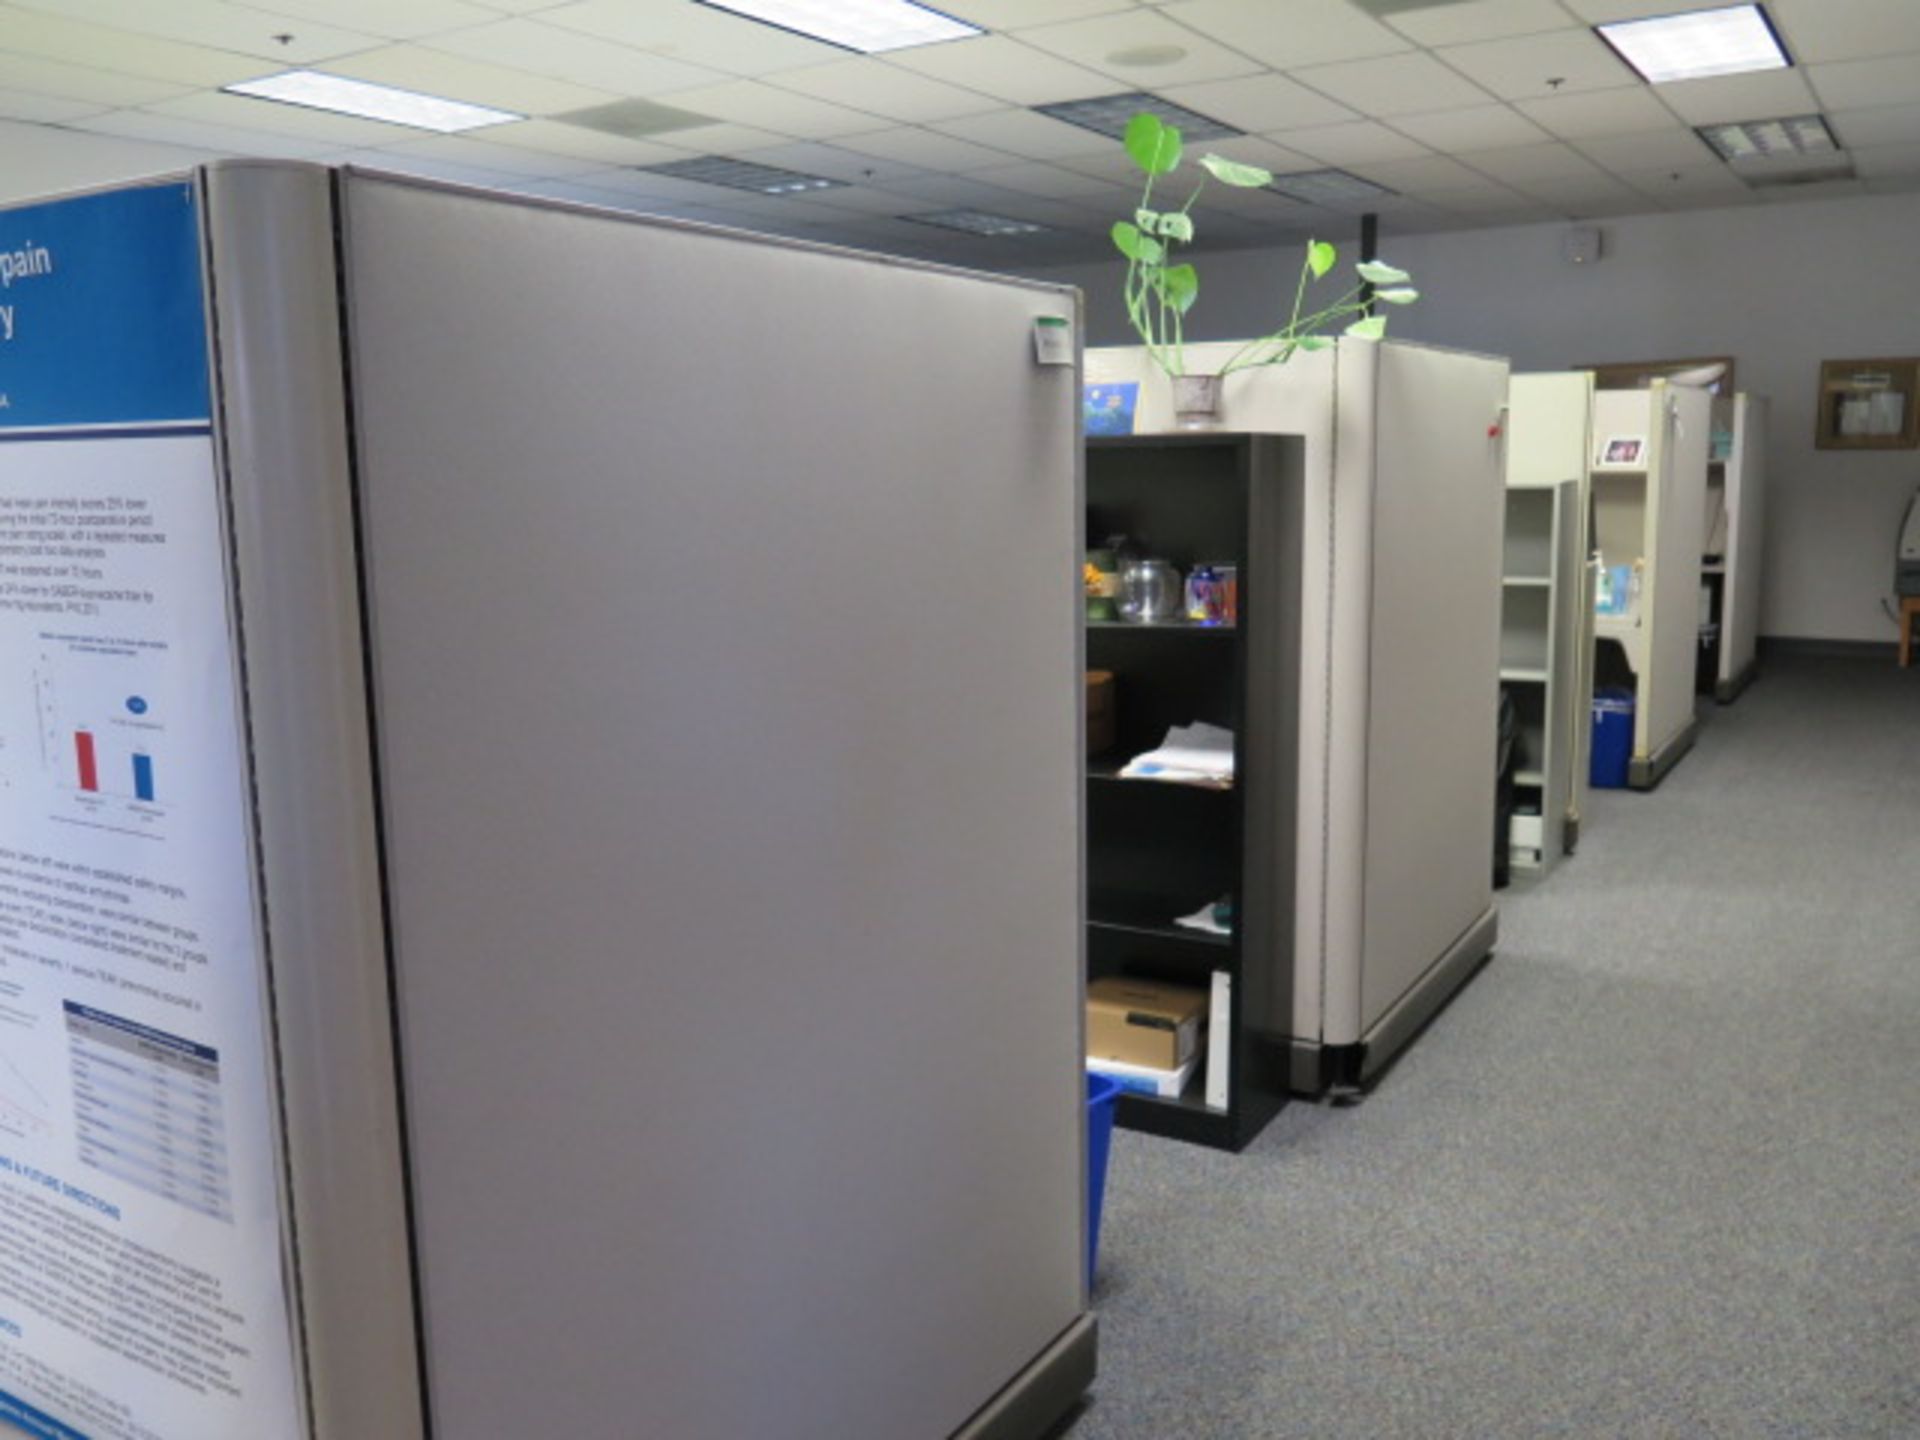 Partitioned Office Cubicles (8) w/ Desks and File Cabinets (SOLD AS-IS - NO WARRANTY) - Image 2 of 10